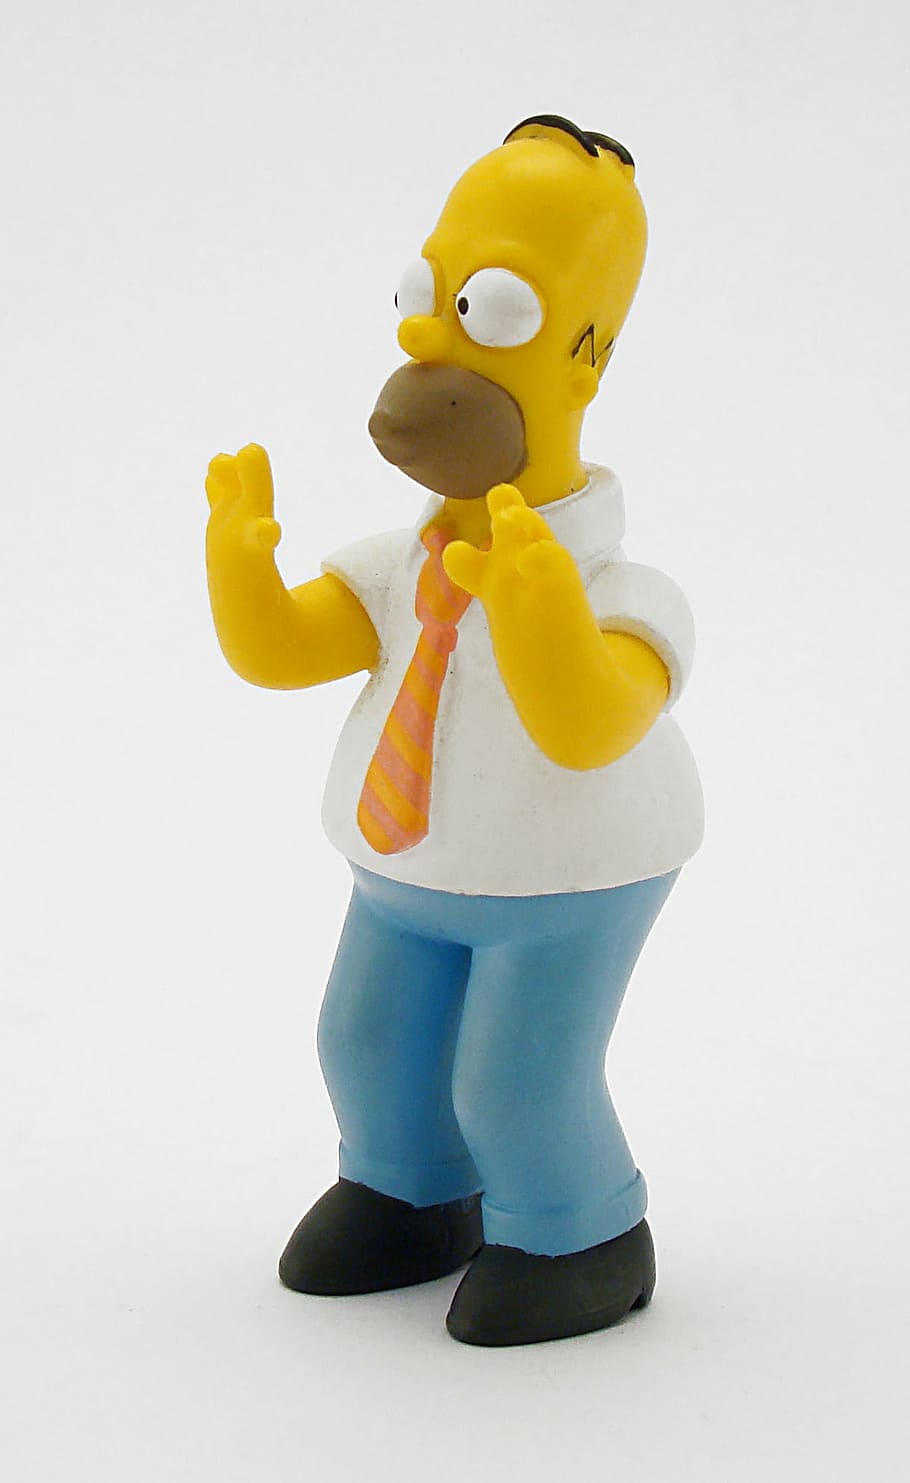 homer simpsons, homer, simpsons, drawing, snowman, toy, studio shot, white background, indoors, representation